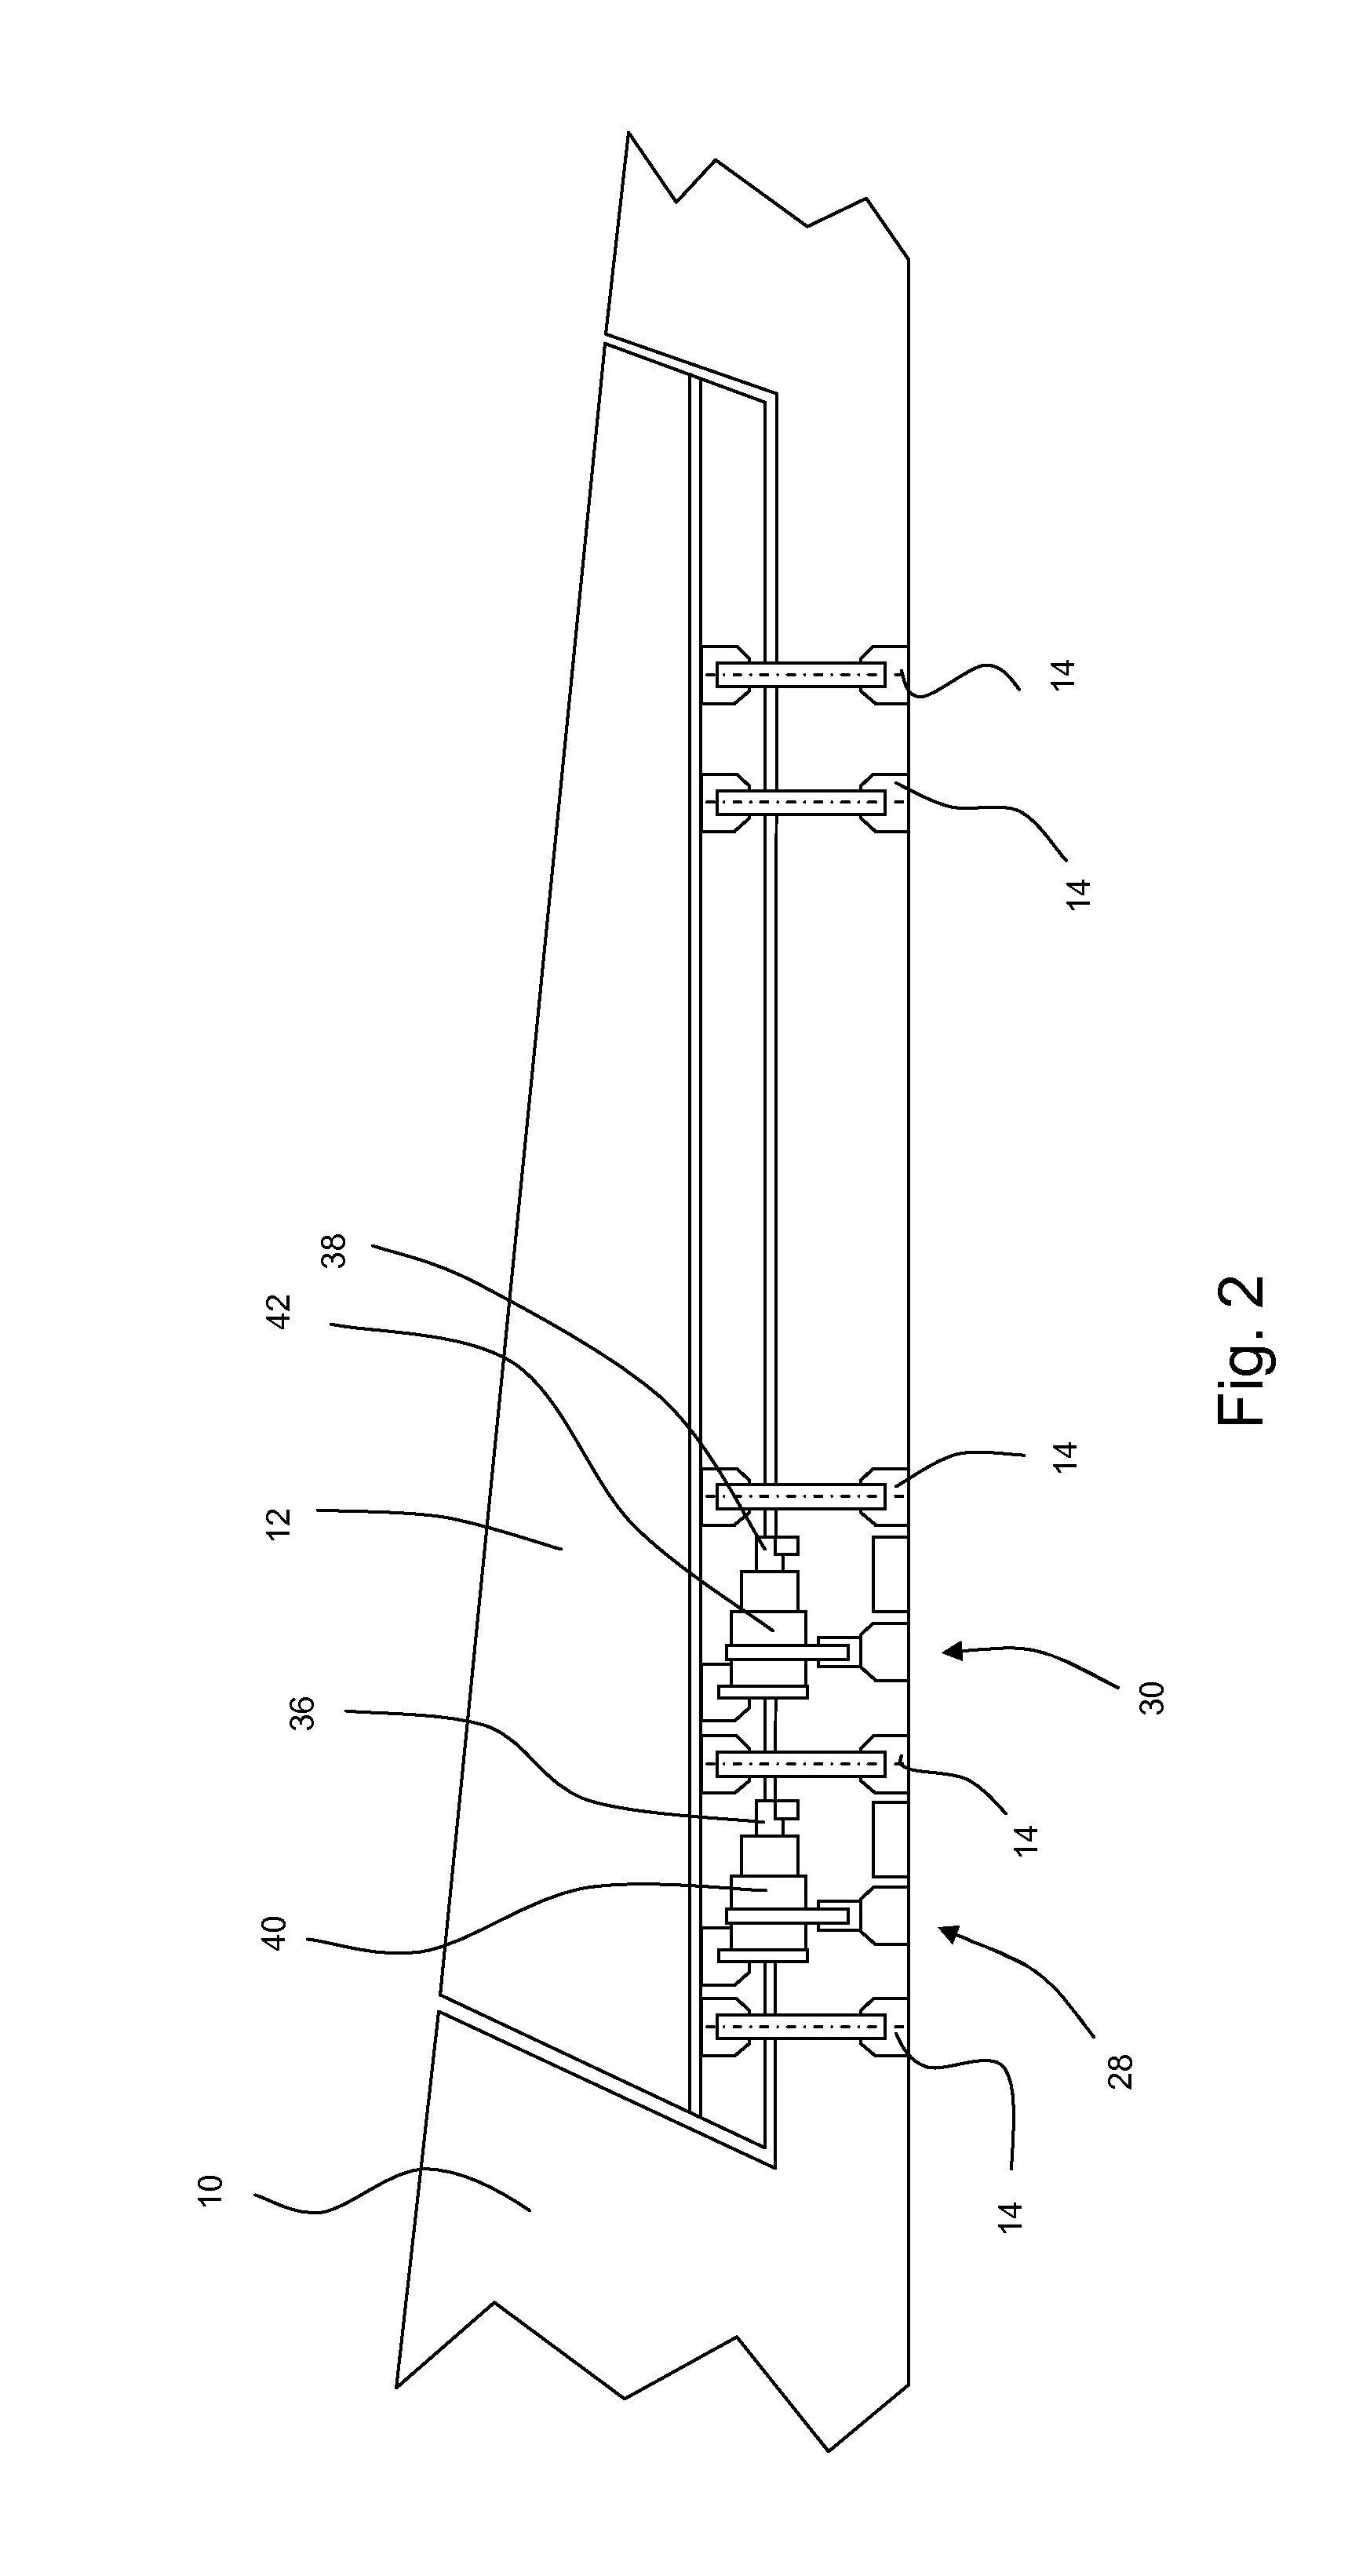 Control surface actuation assembly